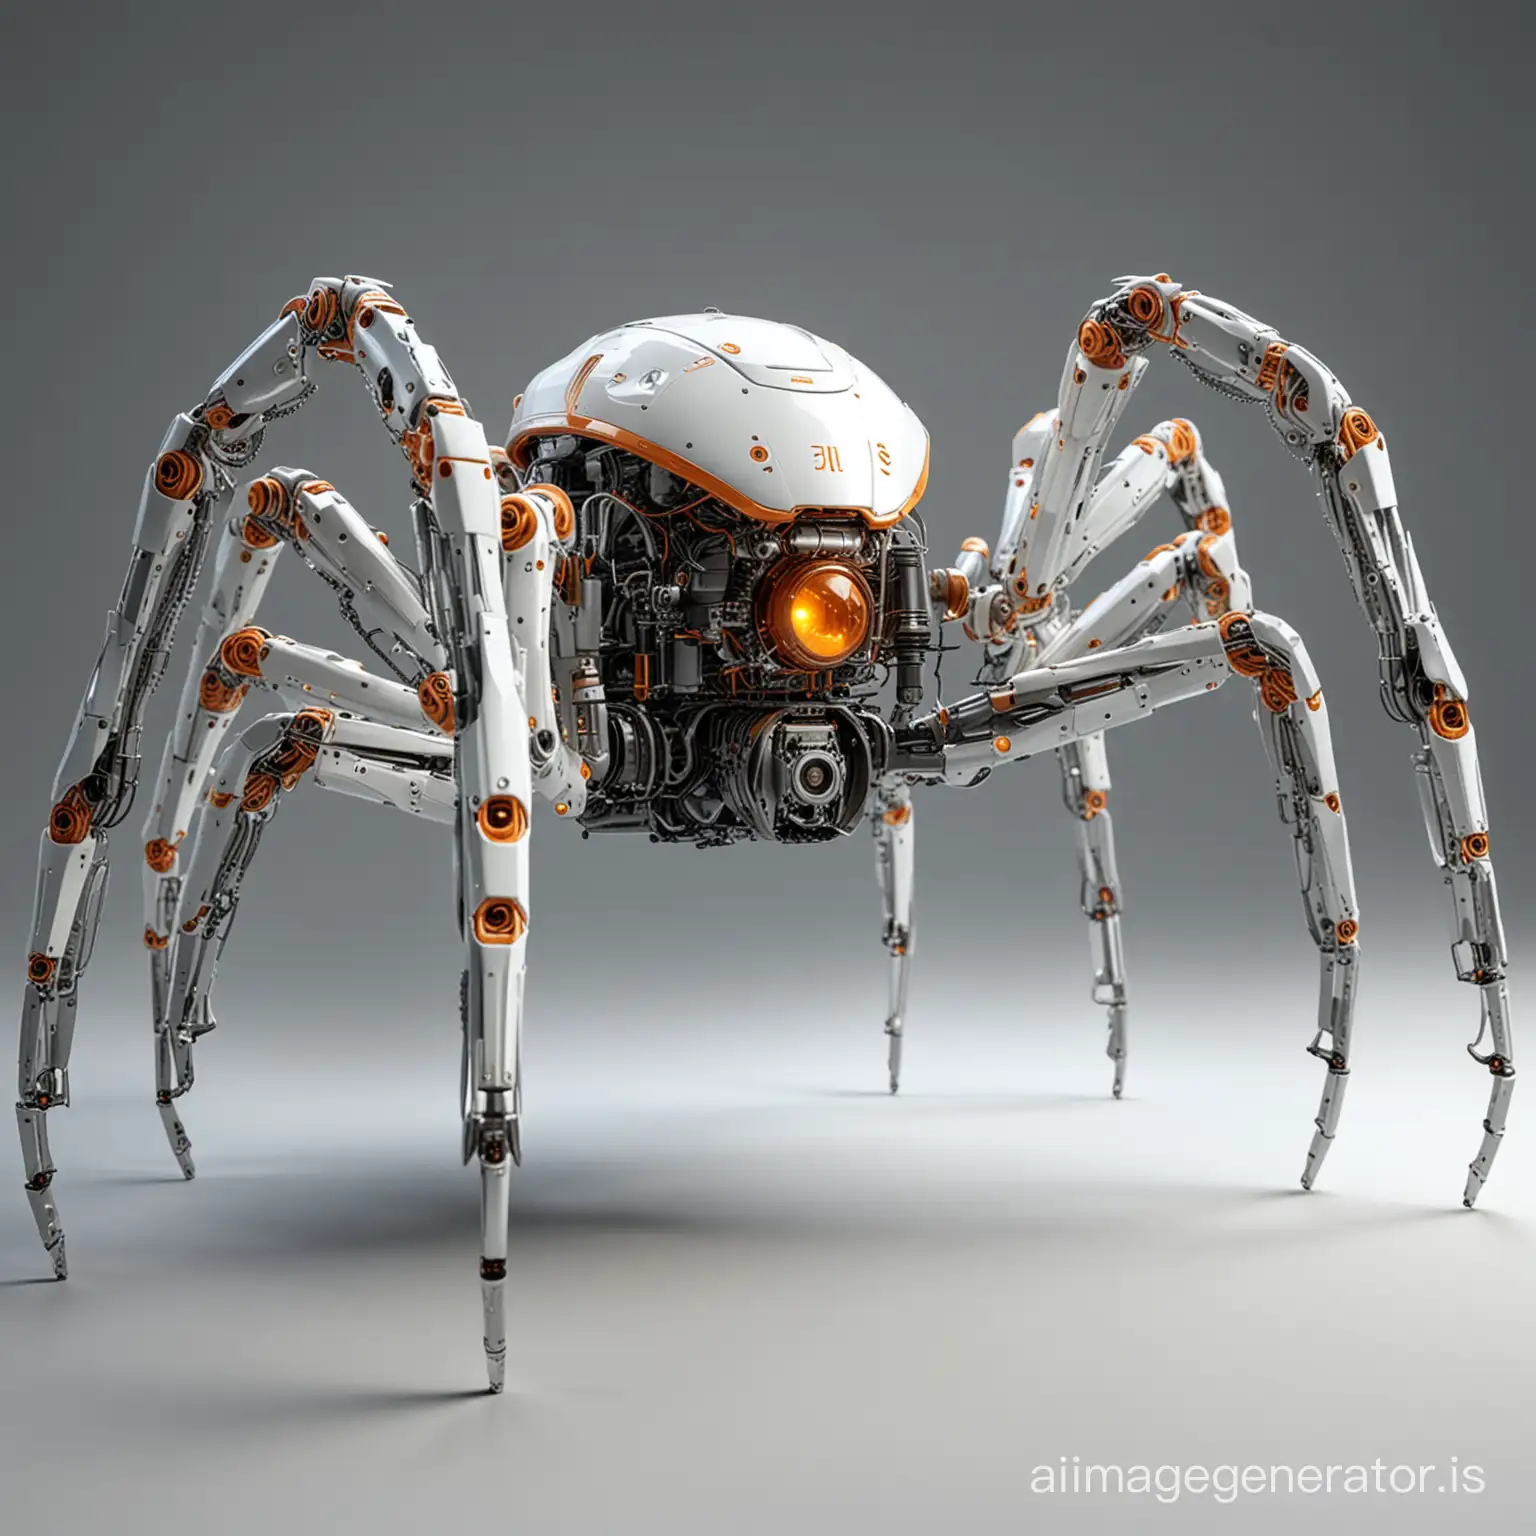 Lens: Wide-Angle Lens
Camera: Step back so we can see it's whole body
Subject: Robotic spider
Body Structure: Central non-spherical body with multiple articulated legs
Body Appearance: Sleek white and metallic surface with advanced technological design
Color Scheme: Silver, chrome, with orange light accents
Head: Small metallic head compared to the body size
Eyes: Two glowing orange eyes, create an intense, focused look
Legs: Eight long, slender, and jointed robotic limbs with pointed ends
Lighting: Ambient light reflecting off the metallic body, with orange lights providing a warm glow
Pose: Ready and alert, in a stance that suggests mobility and agility
Background: White
Environment: Appears to be a dark, smooth surface, possibly in a controlled setting like a lab or a testing ground
Atmosphere: Futuristic and high-tech, with a slightly ominous undertone due to the spider-like form
Detailing: Intricate with visible gears, hydraulics, and wiring within the joints and body segments
Technical Aspects: High-resolution image demonstrating complex mechanical engineering and robotics design
Overall Impression: A sophisticated and possibly autonomous robotic creature designed for precision and adaptability
